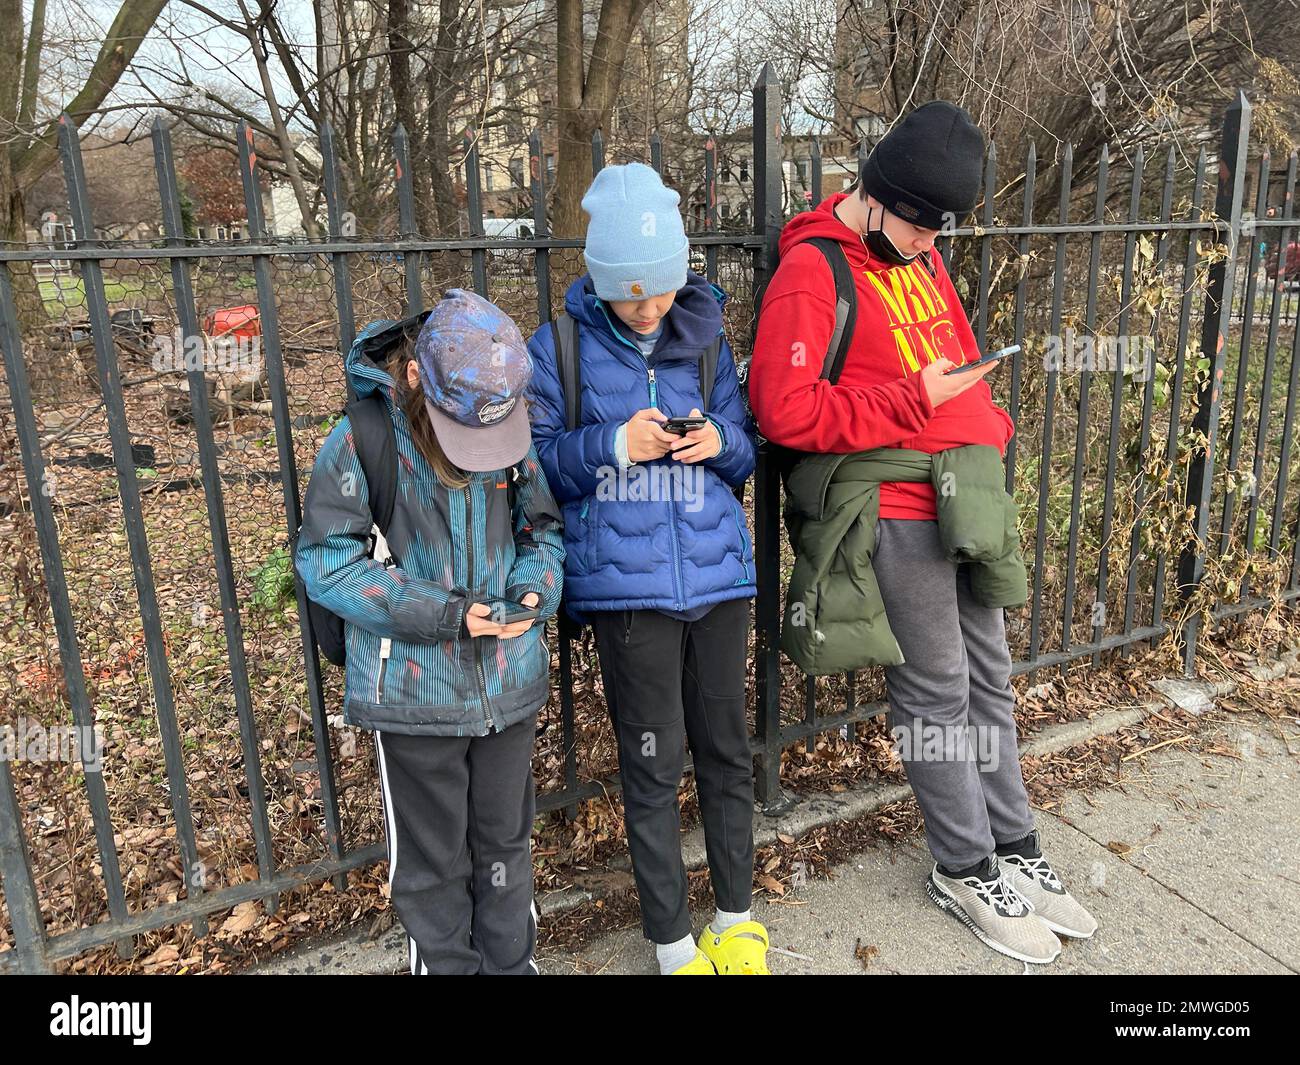 School boys glued to their phones waiting for a city bus to go home after school on Coney Island Avenue at the Parade Grounds in Brooklyn, New York. Stock Photo